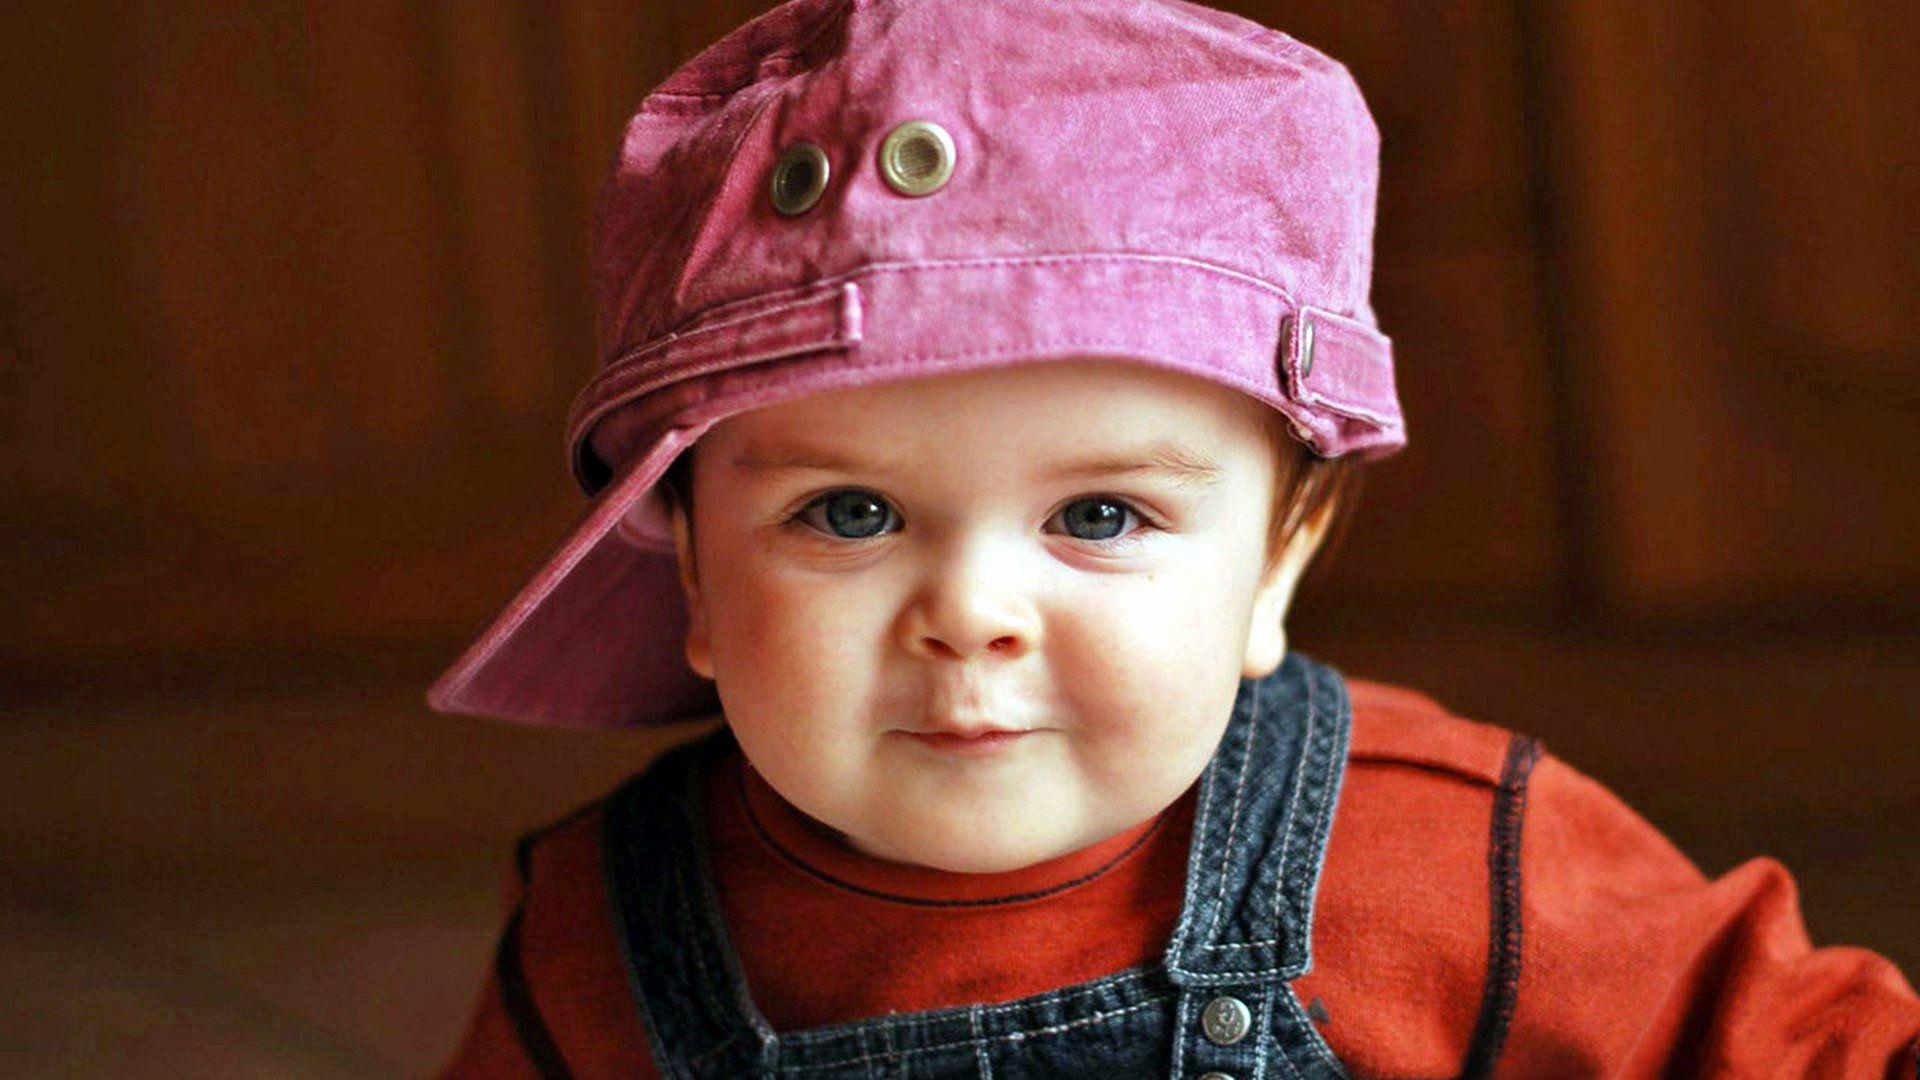 Cute Baby Boy HD Wallpapers - Wallpaper Cave